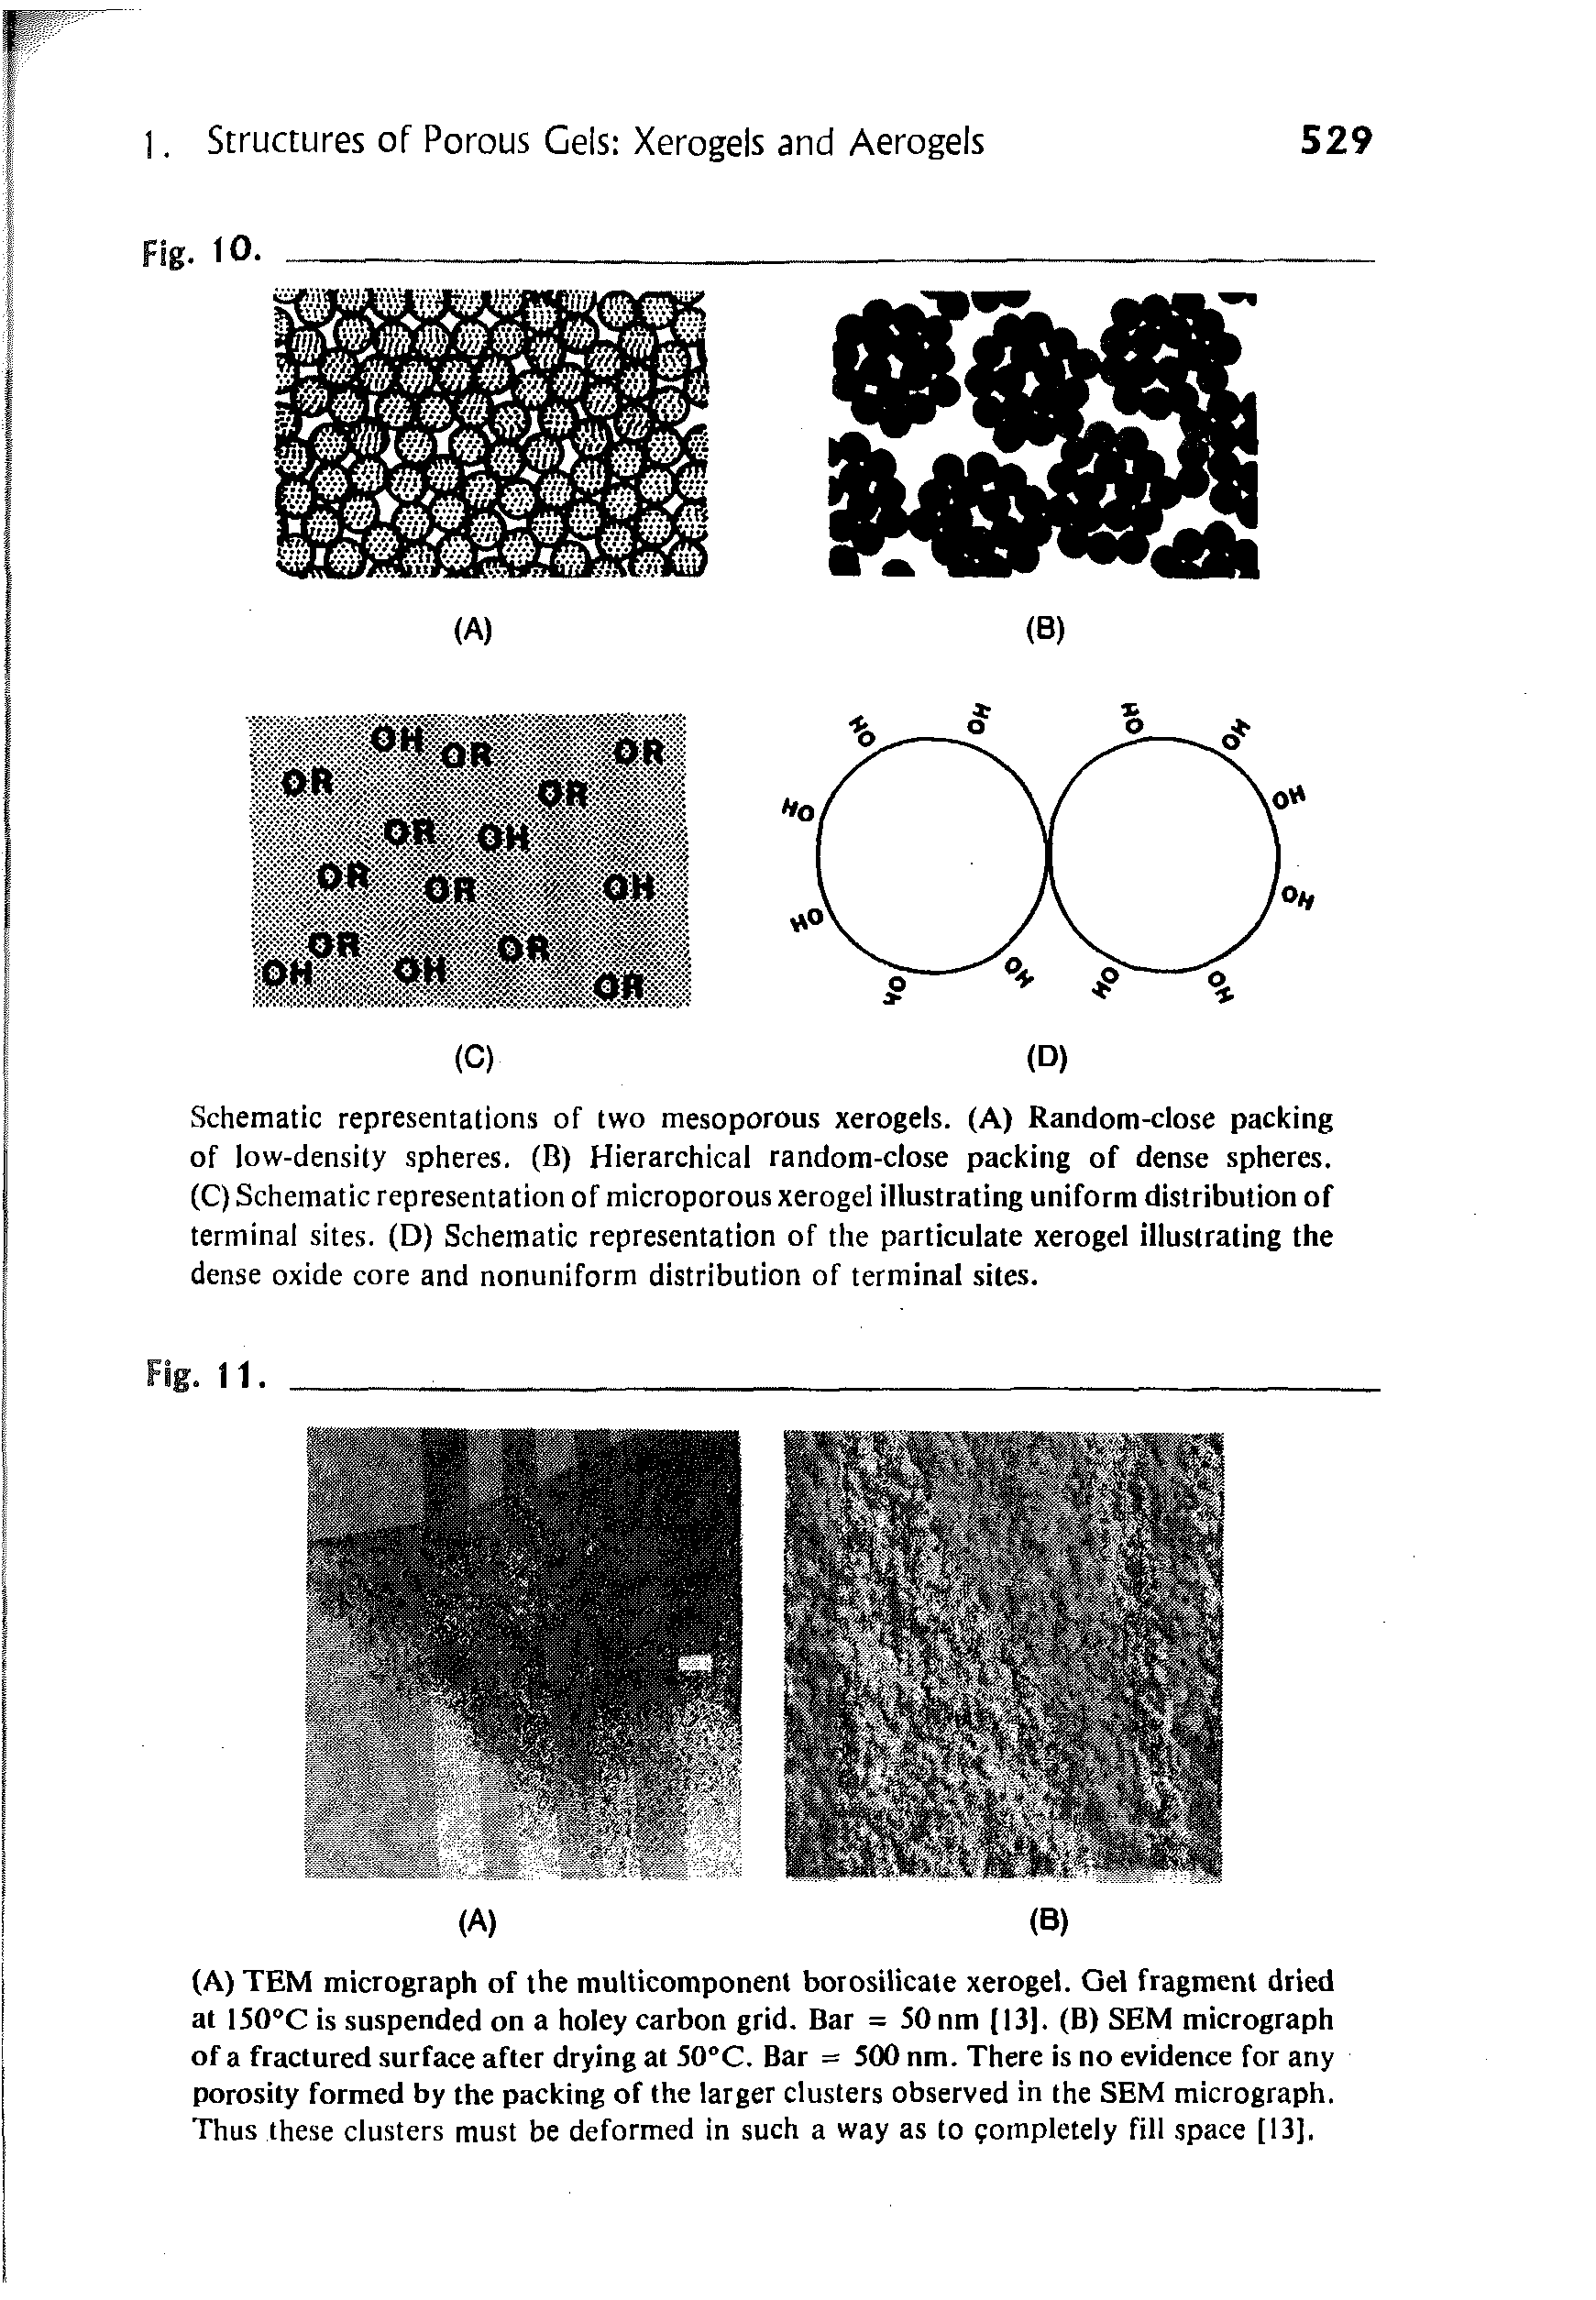 Schematic representations of two mesoporous xerogels. (A) Randonutlose packing of low-density spheres. (B) Hierarchical random-close packing of dense spheres. (C) Schematic representation of microporous xerogei illustrating uniform distribution of terminal sites. (D) Schematic representation of the particulate xerogei illustrating the dense oxide core and nonuniform distribution of terminal sites.